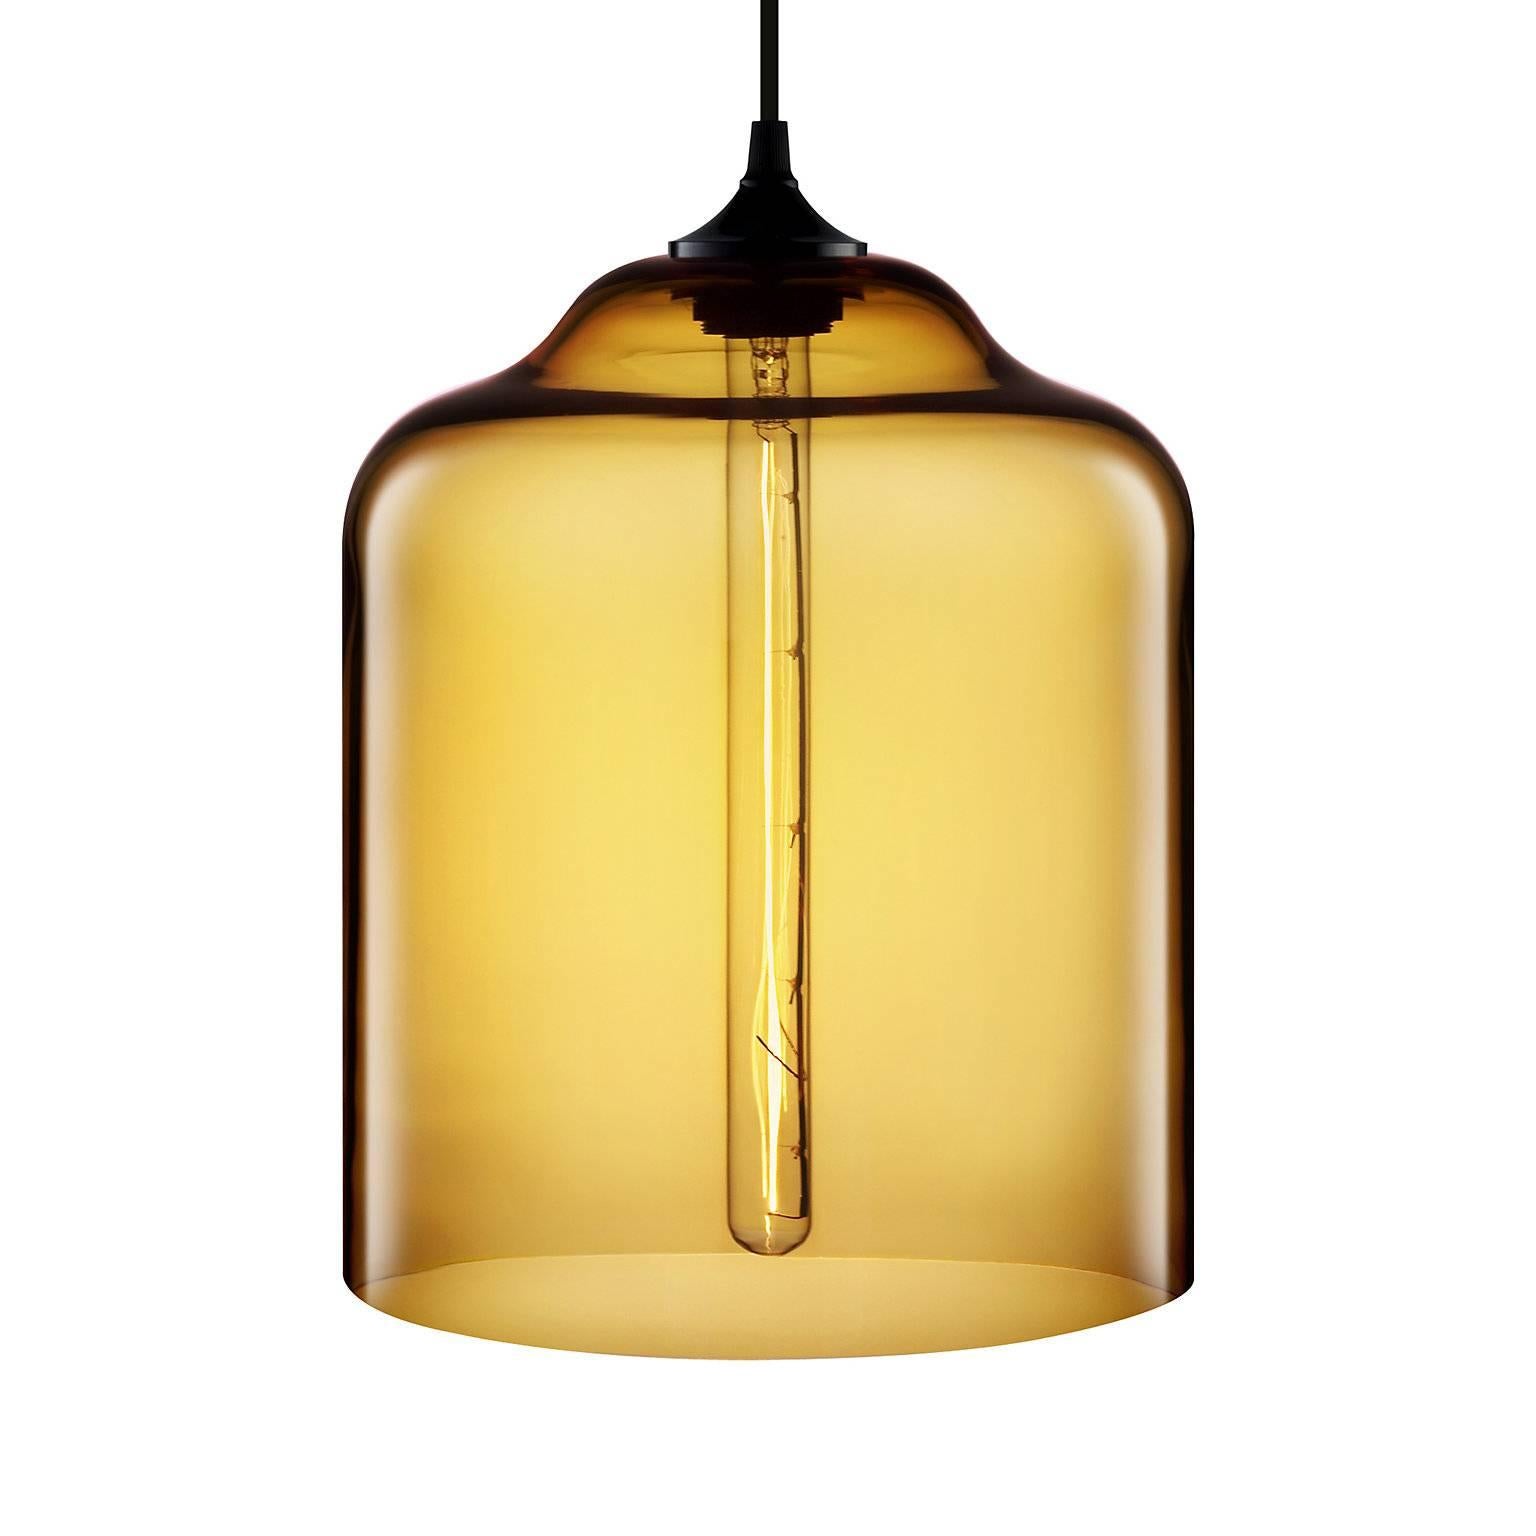 Celebrating iconic design, the Bell jar and its sleeker companion, the Bella, cast glorious beams of light that are as warm as they are welcoming. Every single glass pendant light that comes from Niche is hand-blown by real human beings in a